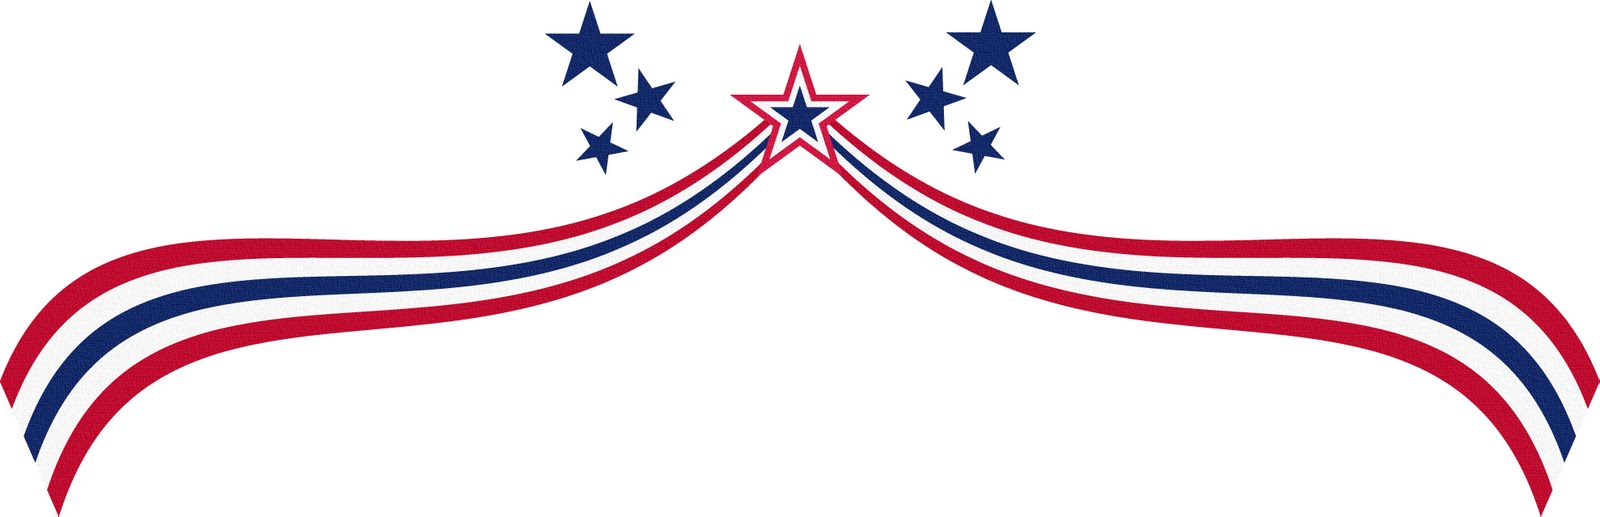 4th of July Banner Clip Art Free